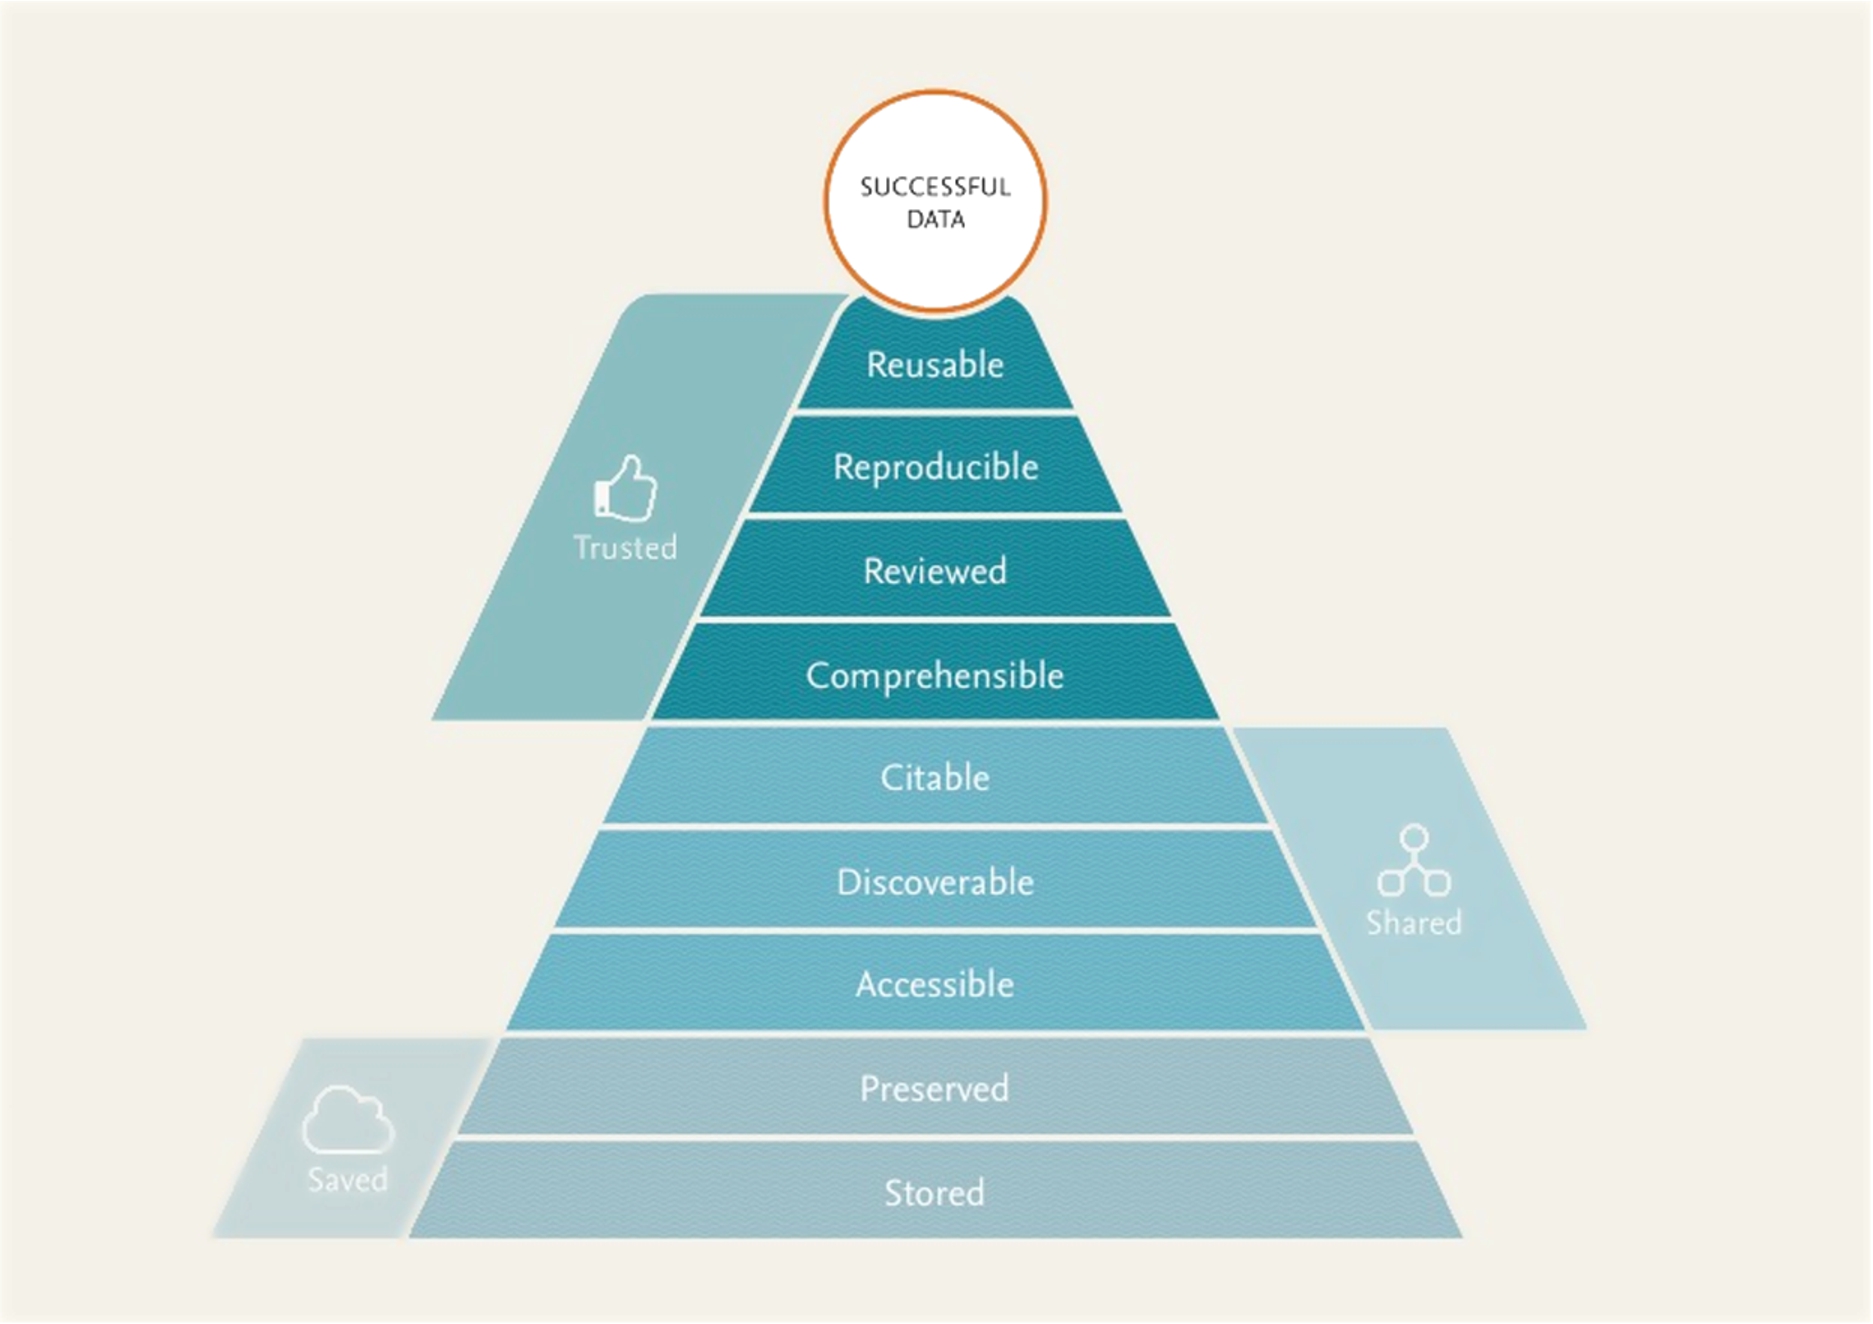 A “pyramid” of requirements for reusable data, indicating that in order to be reused, it needs to be saved, shared, and trusted. For details on each of the ‘layers’ of the Pyramid, see the corresponding section of the paper.